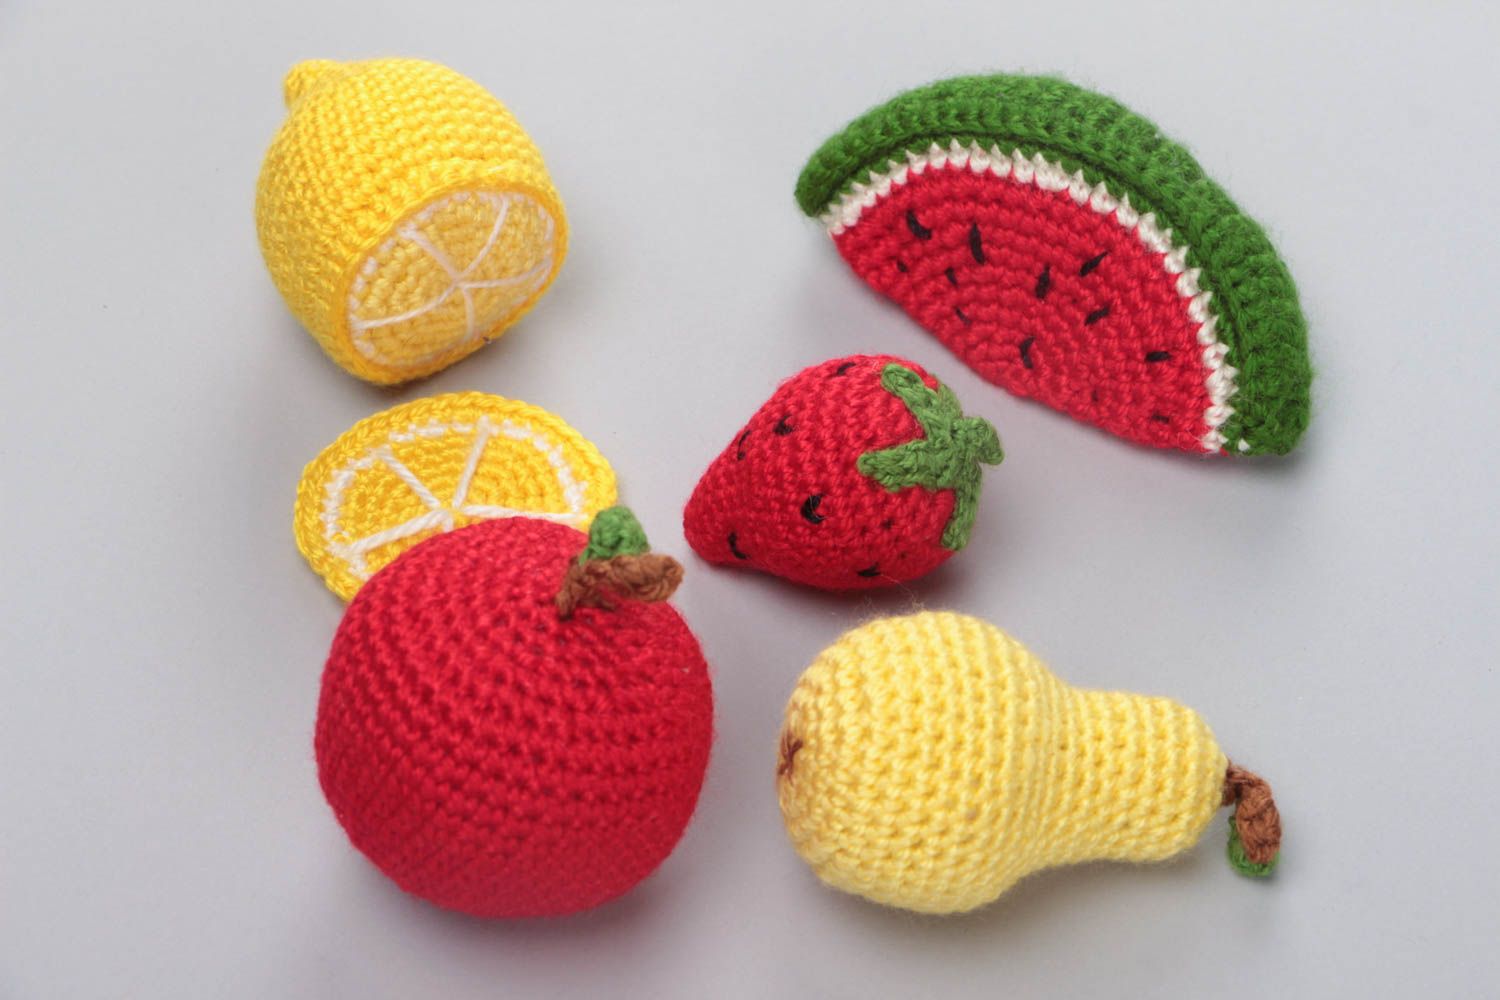 Set of 6 handmade crocheted soft colorful fruit toys for kids and interior decor photo 2